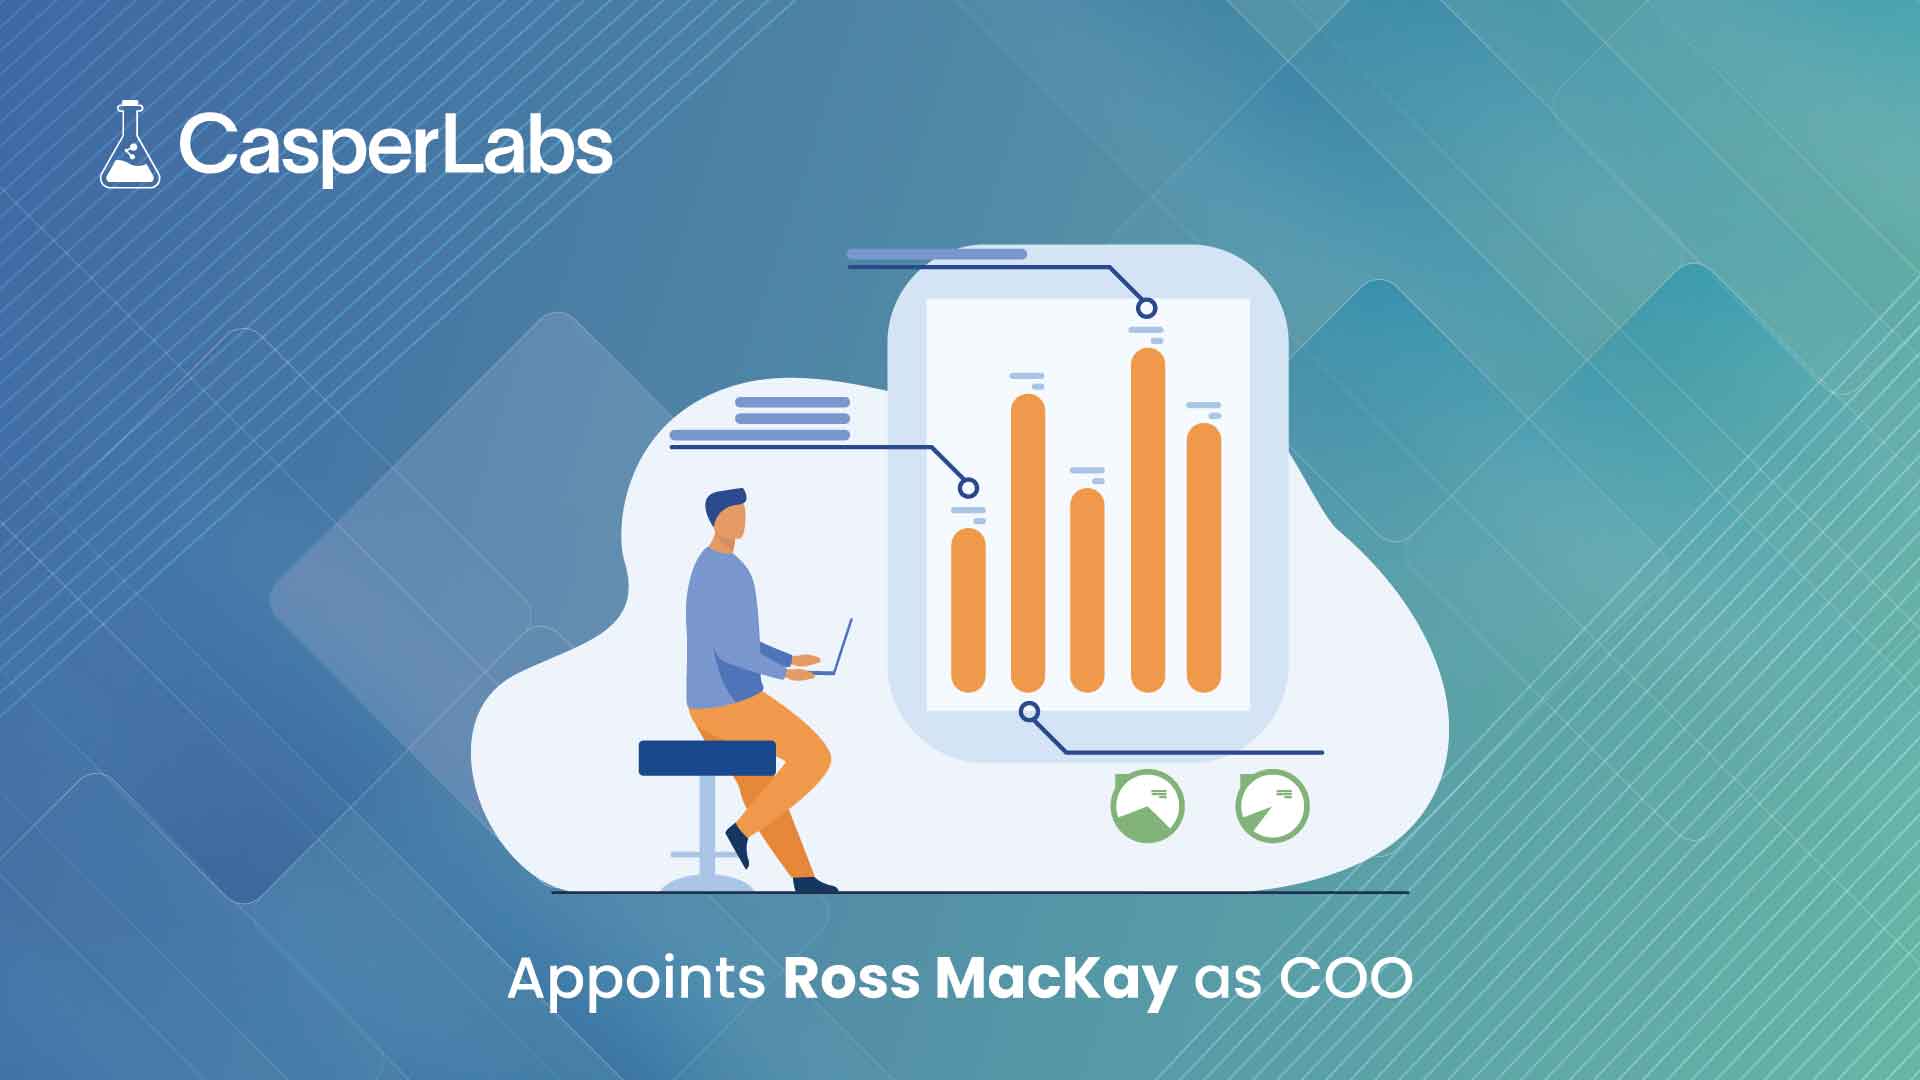 CasperLabs Appoints Ross MacKay as Chief Operating Officer